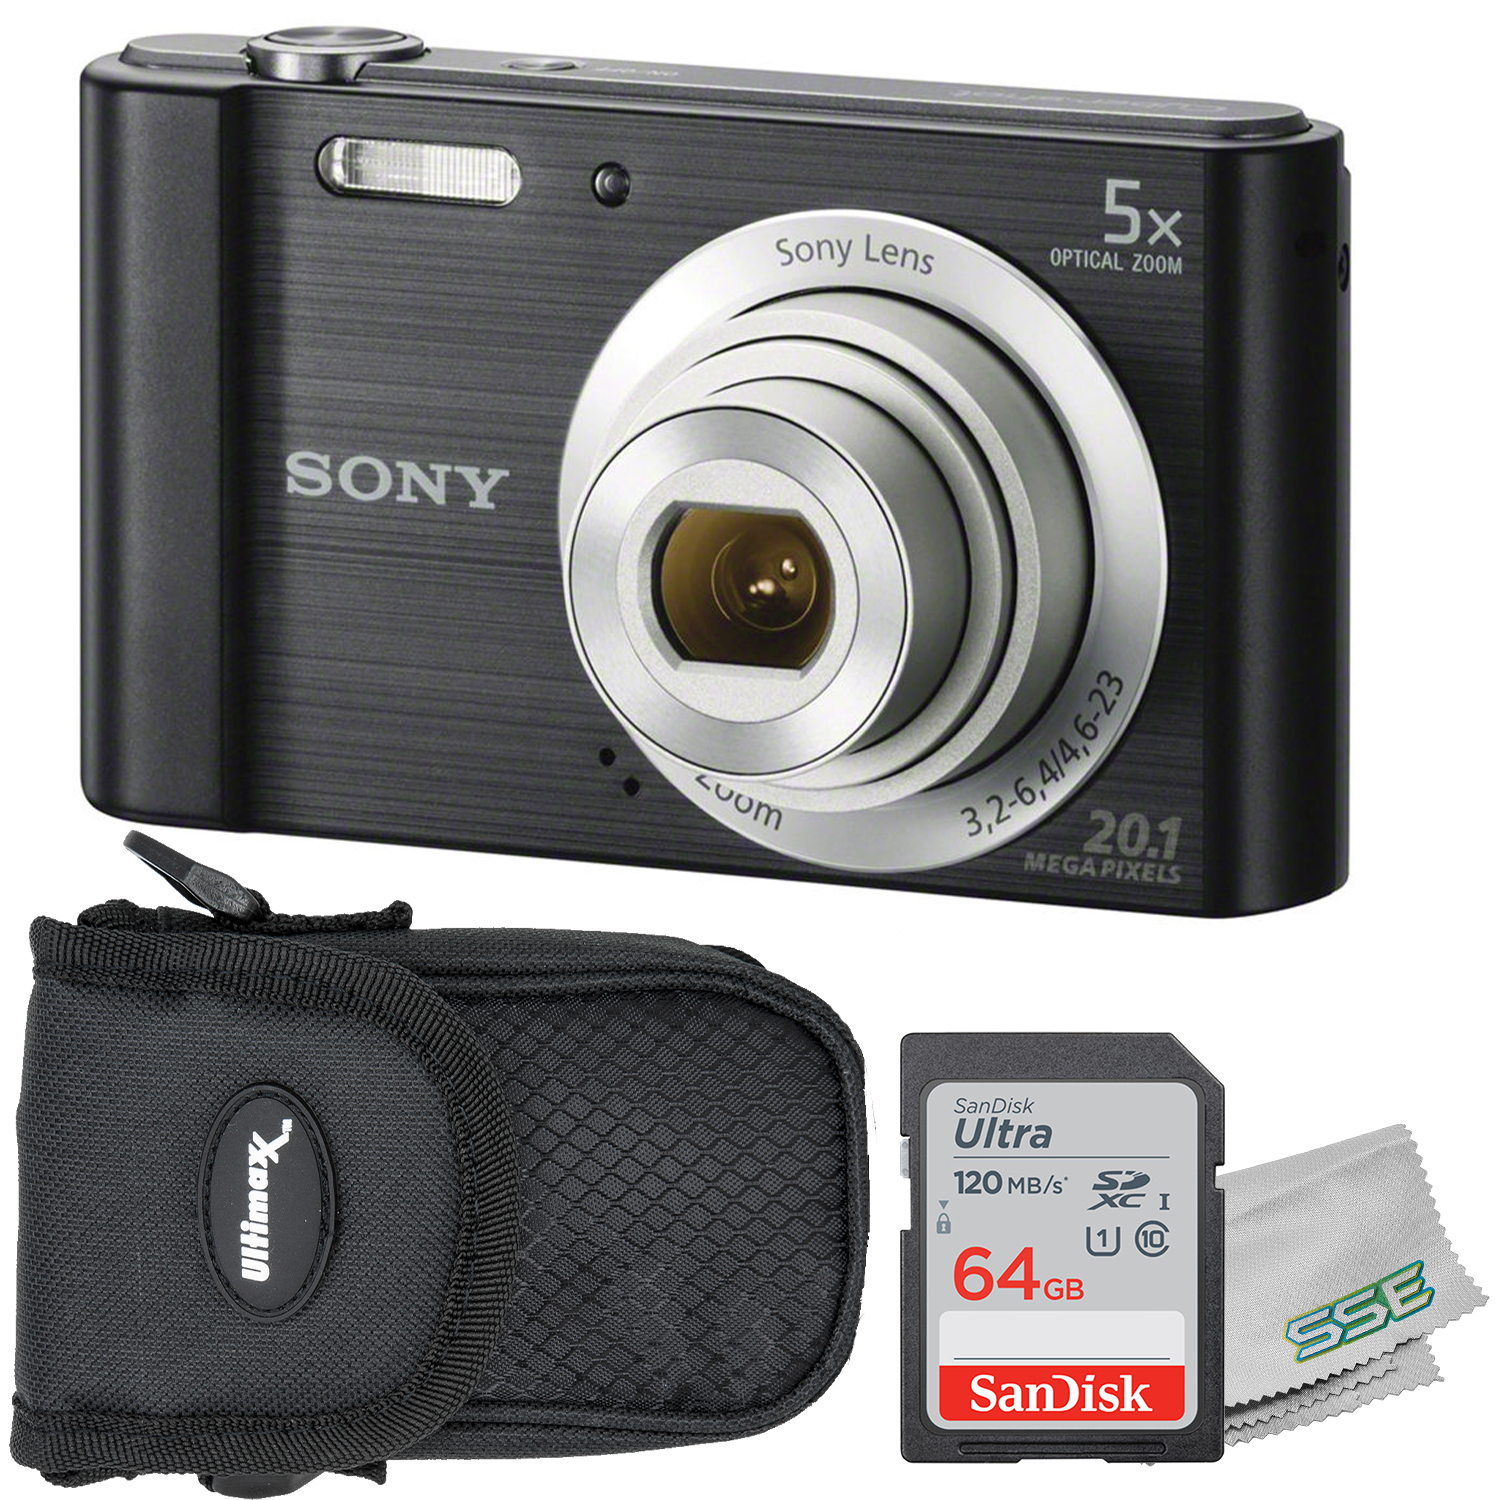 Sony Cyber-shot DSC-W800 Digital Camera (Black) with Starter Accessory Bundle: SanDisk Ultra 64GB SDXC Memory Card, Water Resistant Point & Shoot Camera Case & More - image 1 of 10